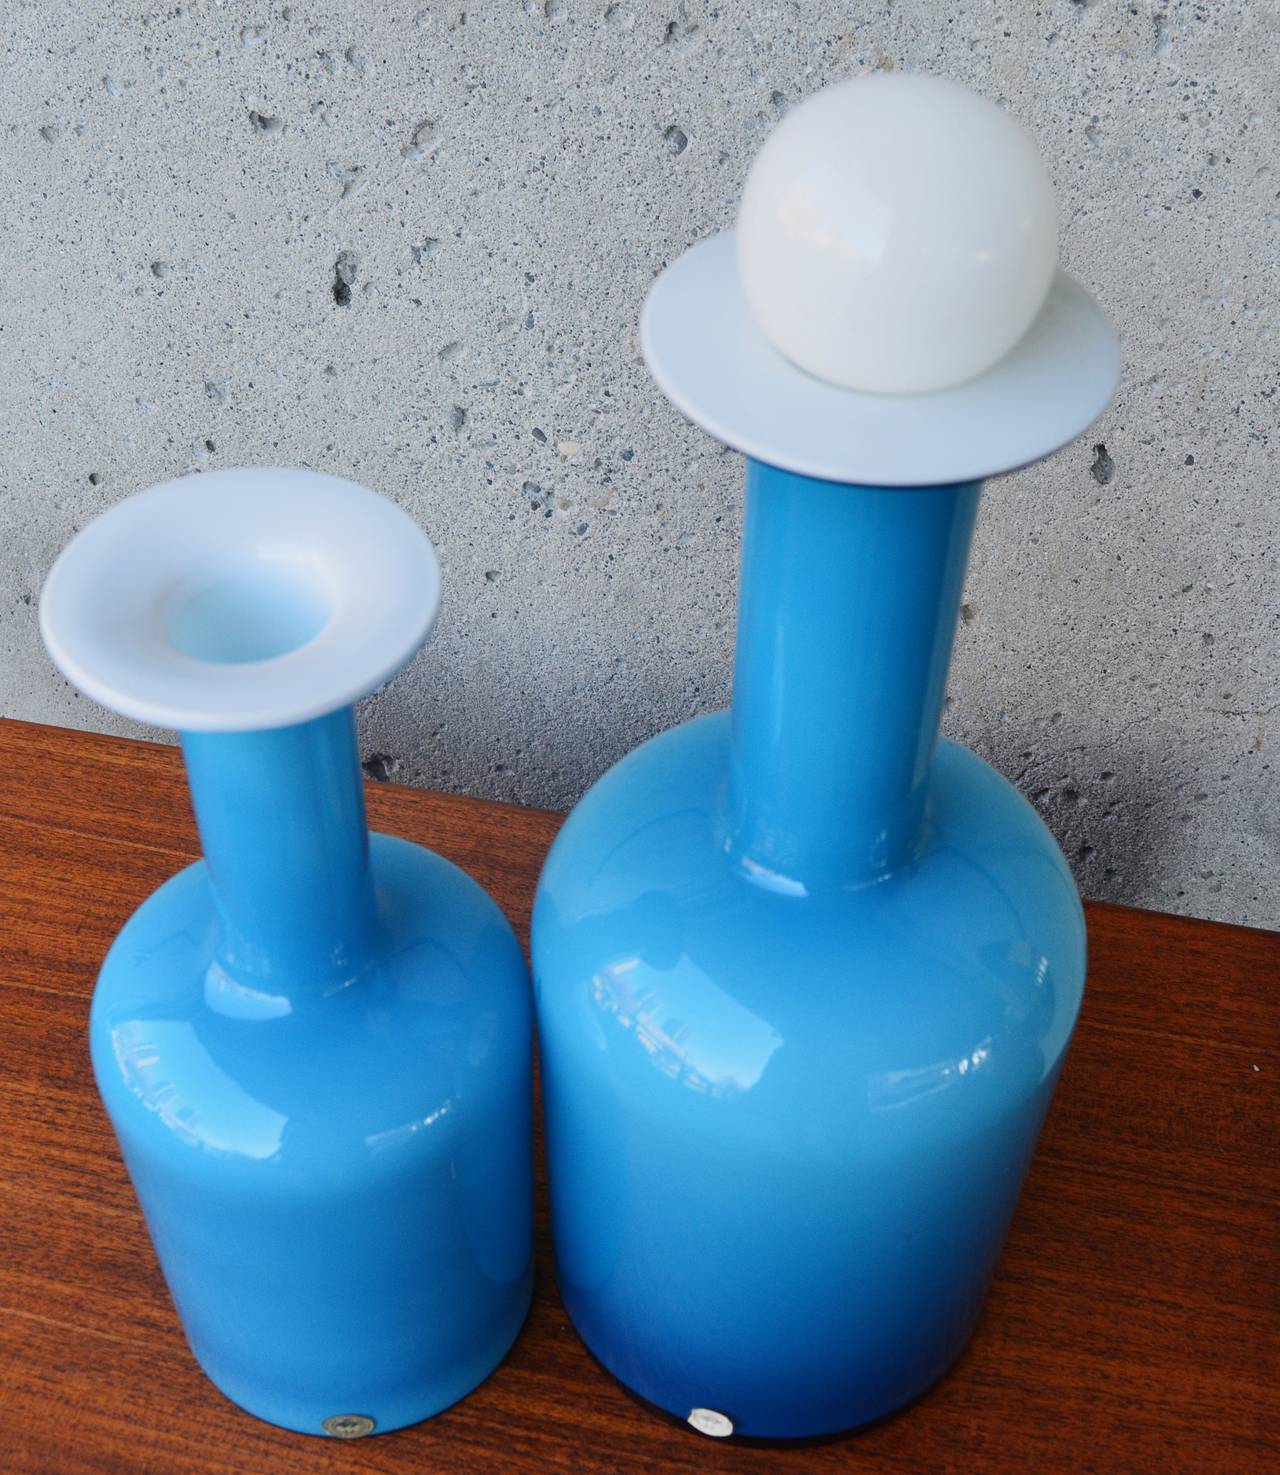 This stellar pair of striking turquoise glass gull vases--one with the rare finial, were designed by Otto Brauer for Holmegaard.  Cased in white, it gives the glass a beautiful translucent sheen.  Both are in excellent condition with the original